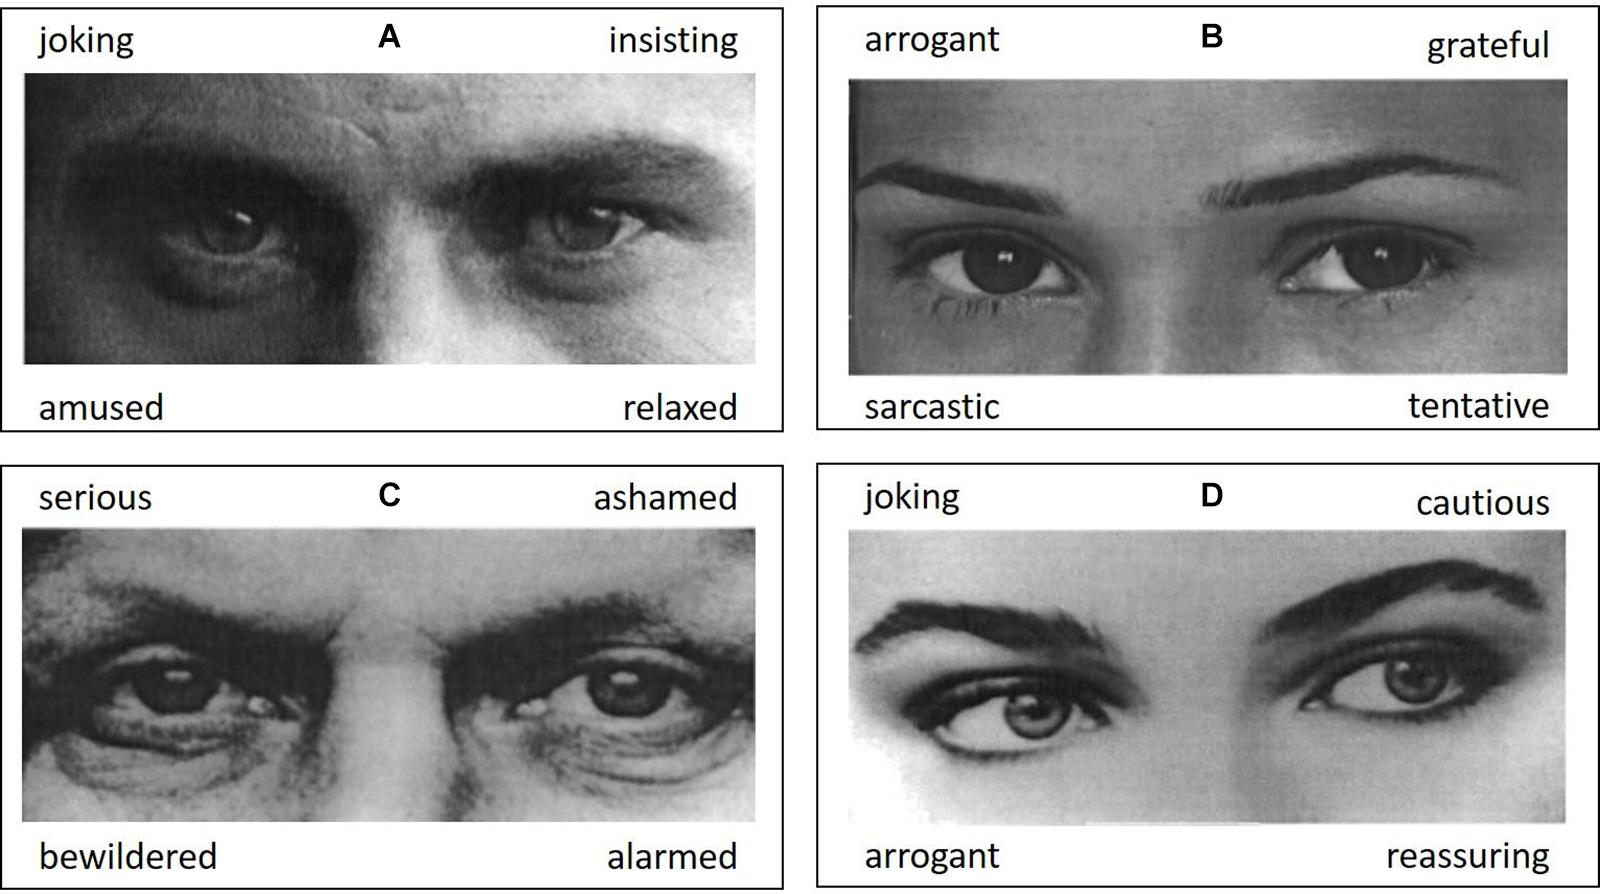 Frontiers  Mindreading From the Eyes Declines With Aging – Evidence From  1,603 Subjects